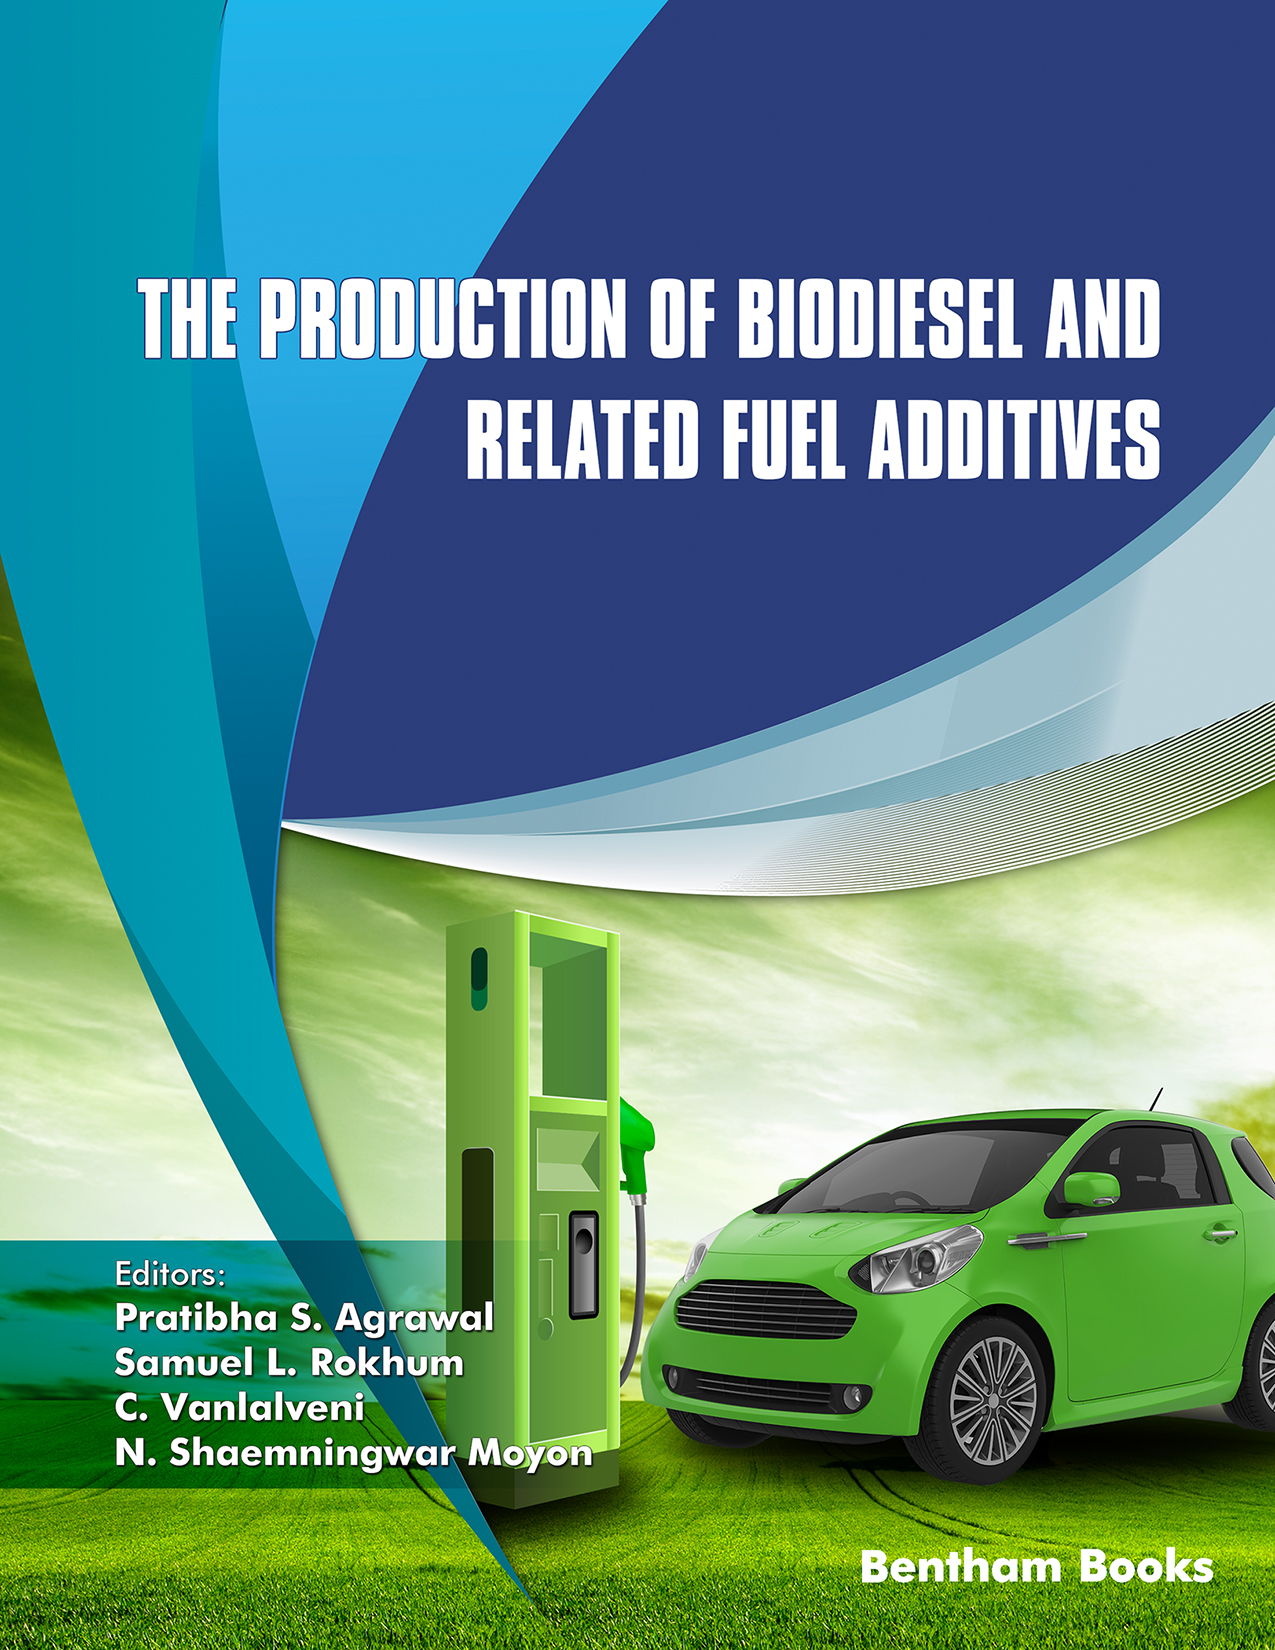 The Production of Biodiesel and Related Fuel Additives